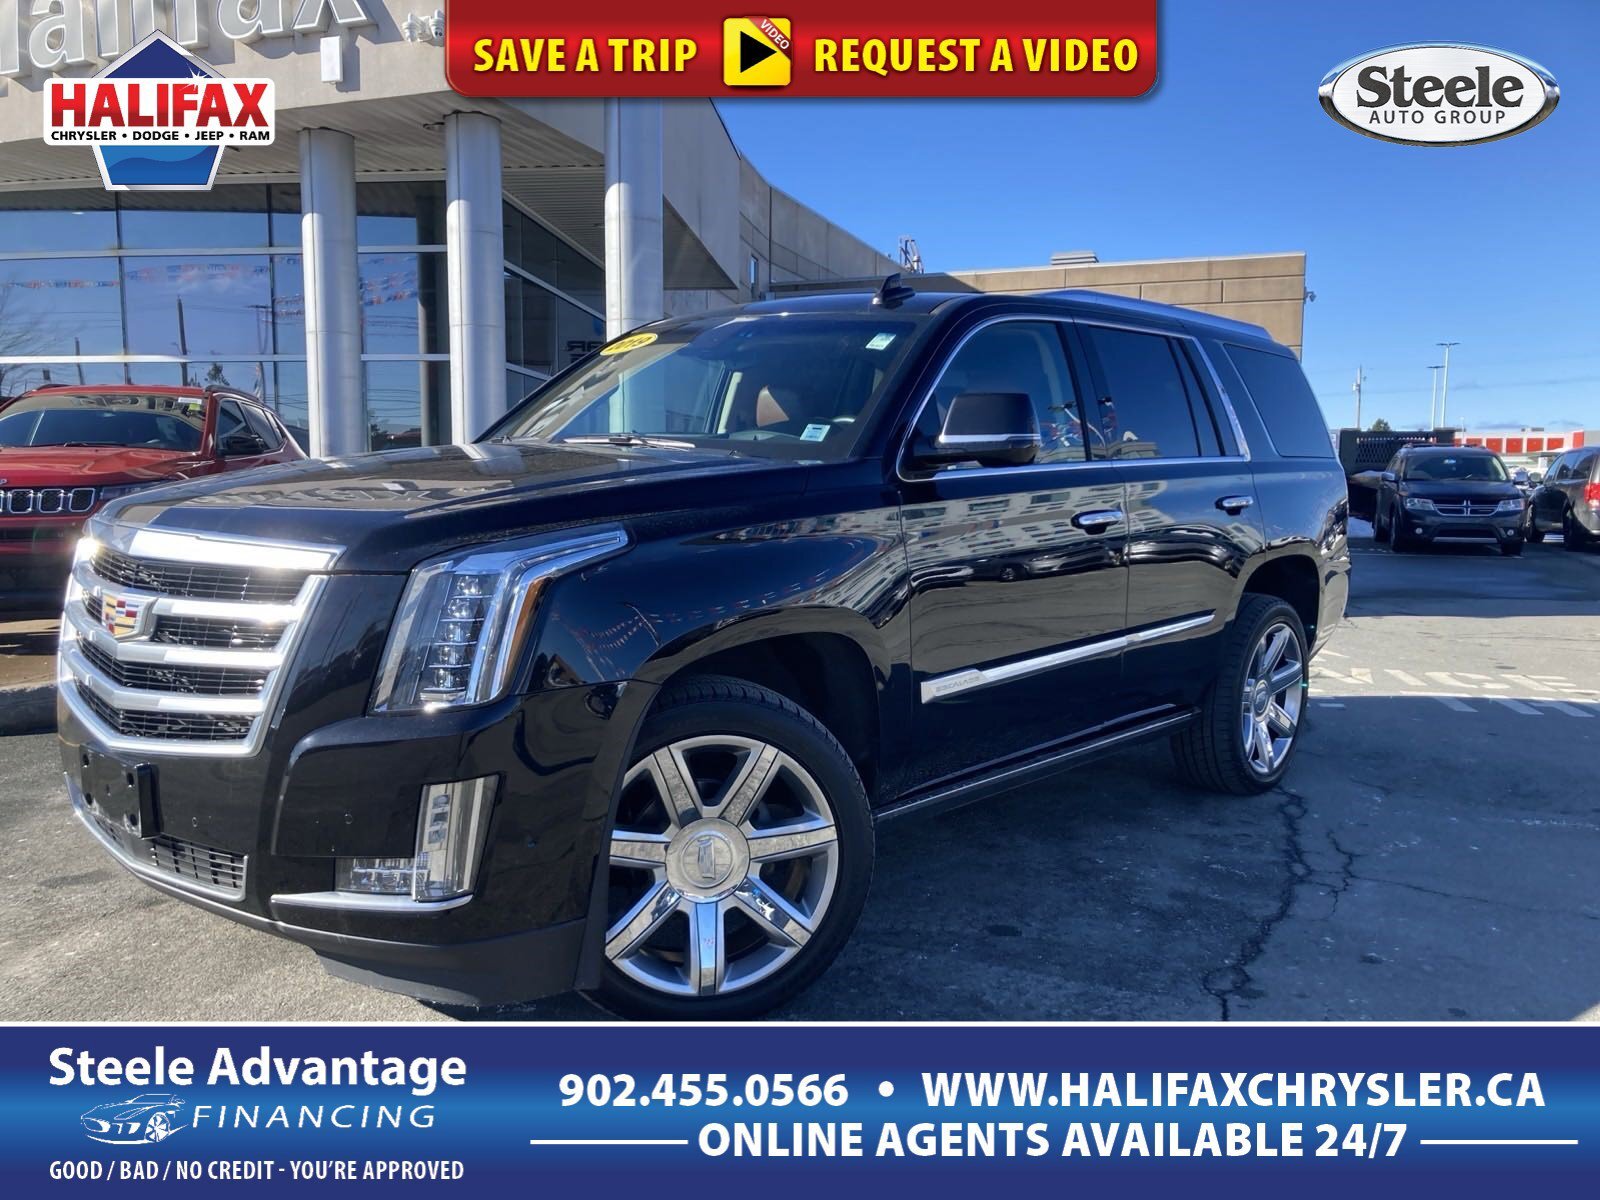 2019 Cadillac Escalade Premium Luxury FULL SIZE, 4WD, DVD, HEATED AND COO